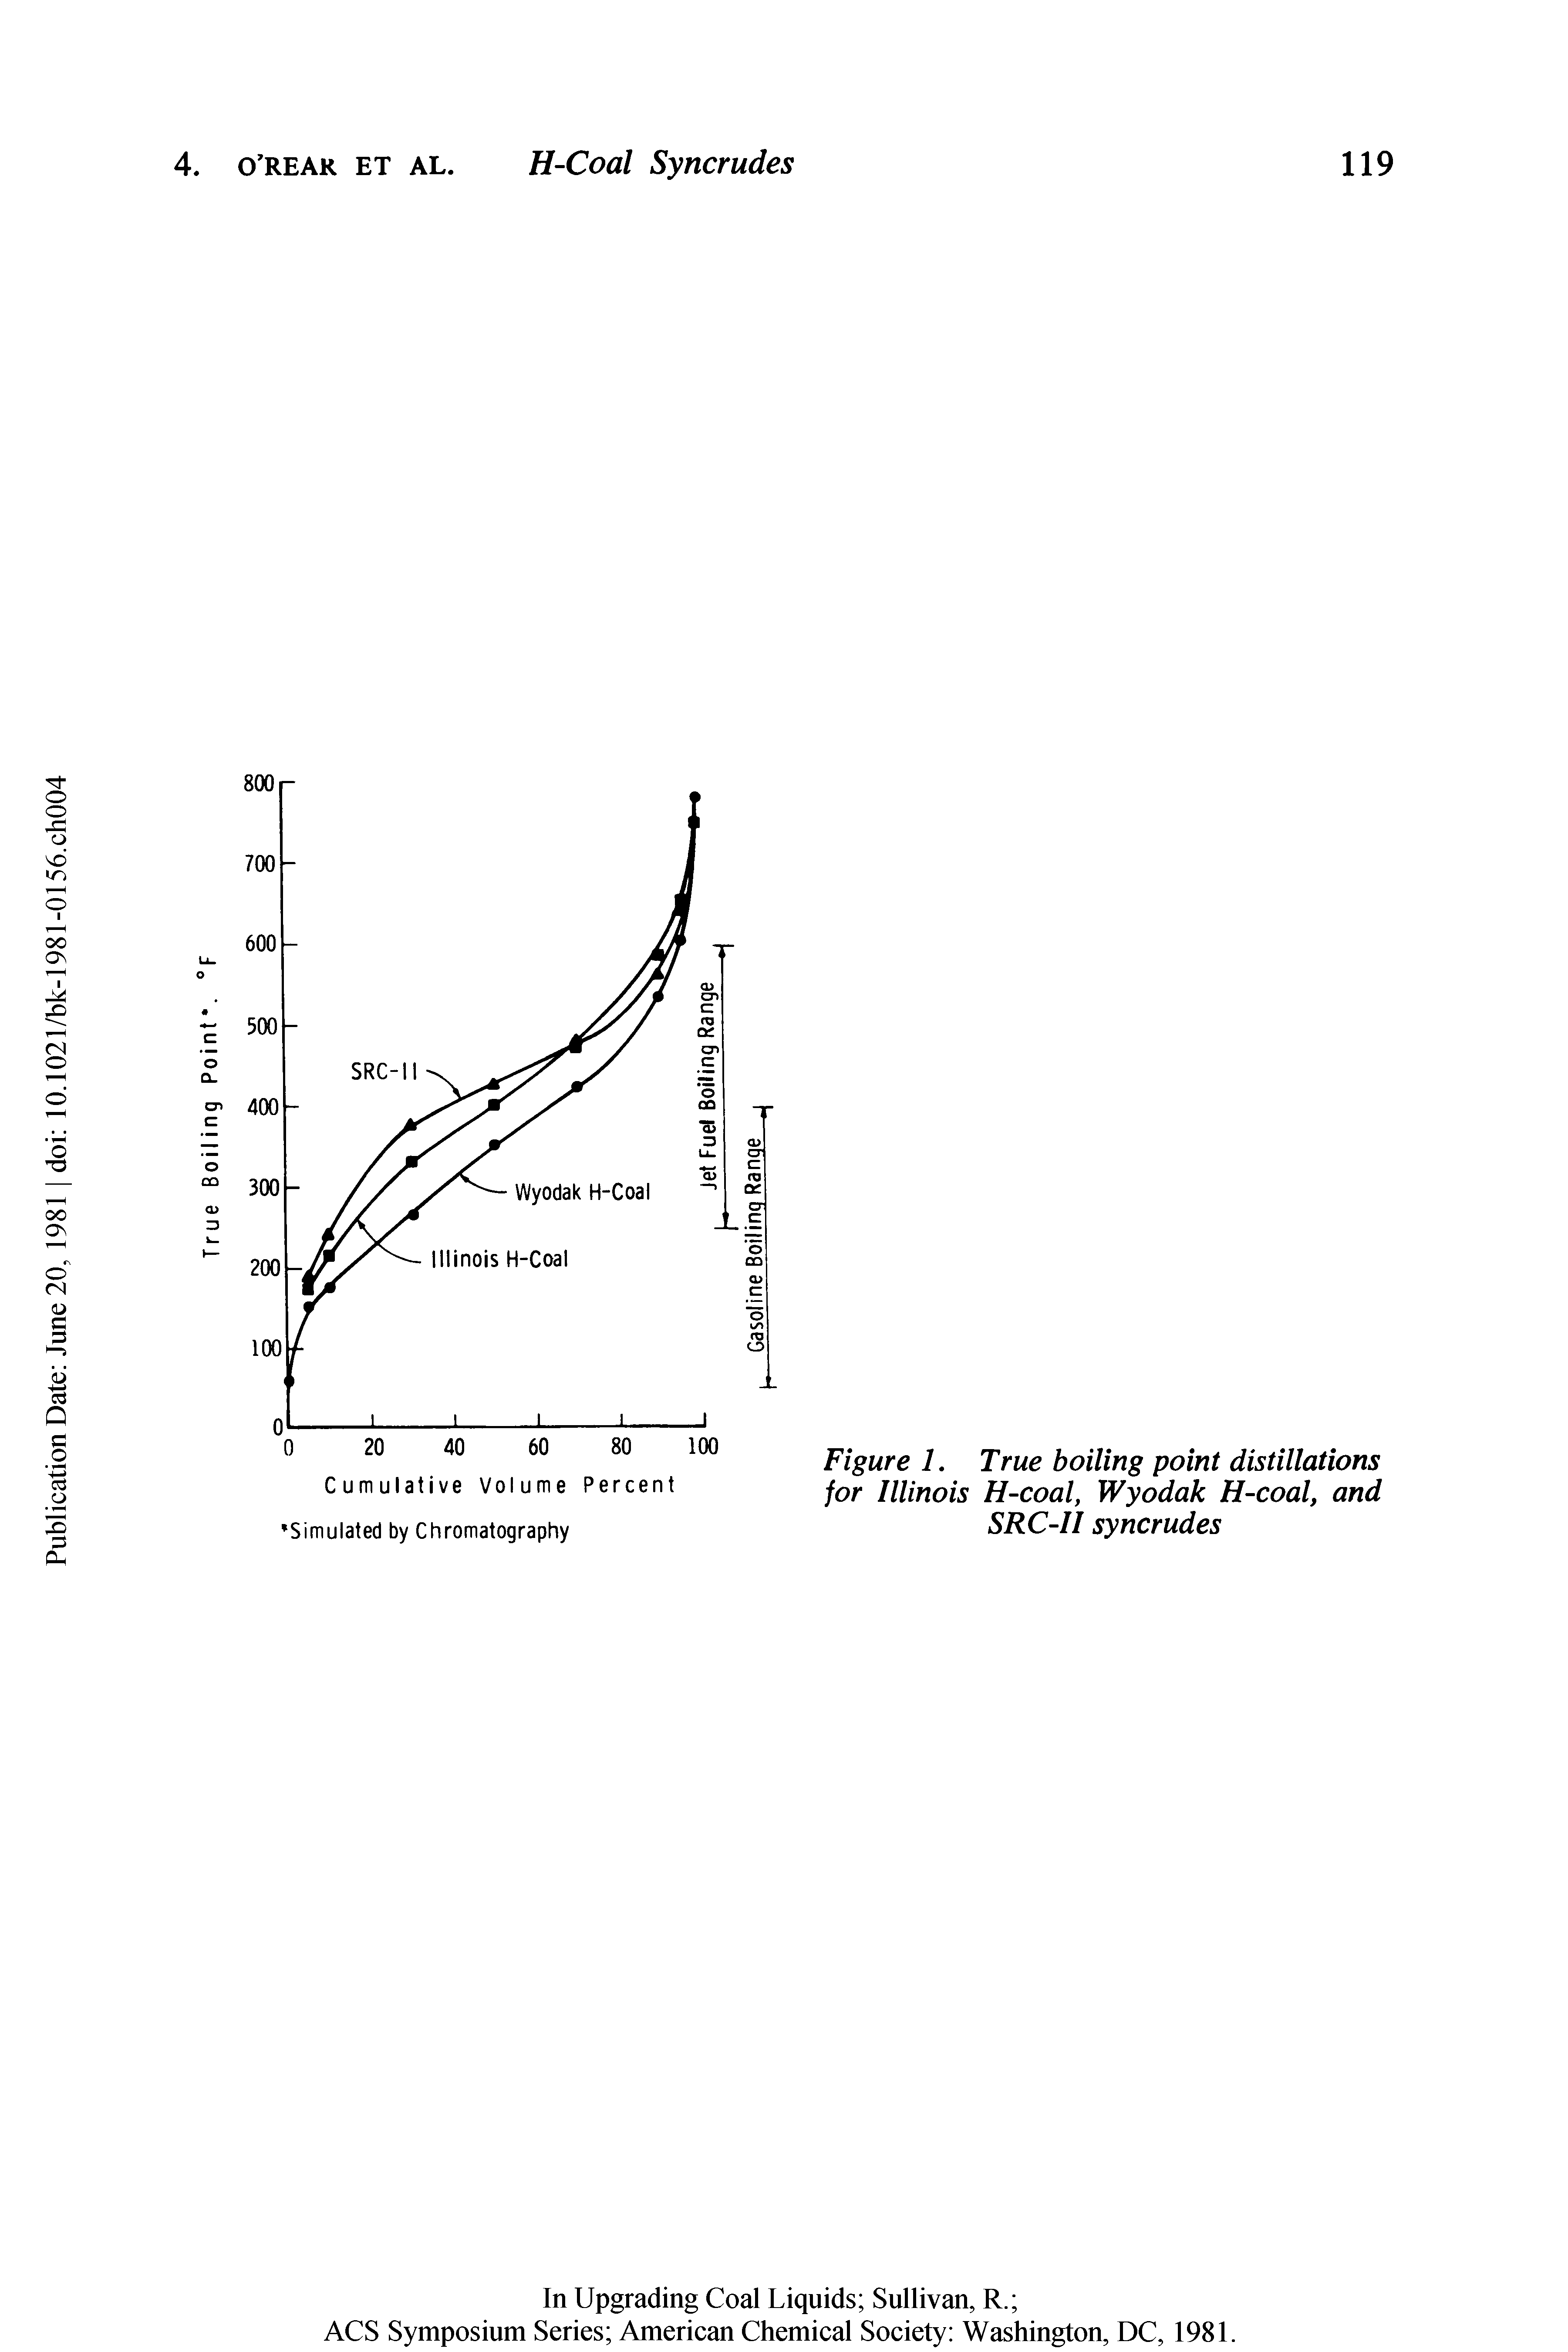 Figure 1. True boiling point distillations for Illinois H-coal, Wyodak H-coal, and SRC-II syncrudes...